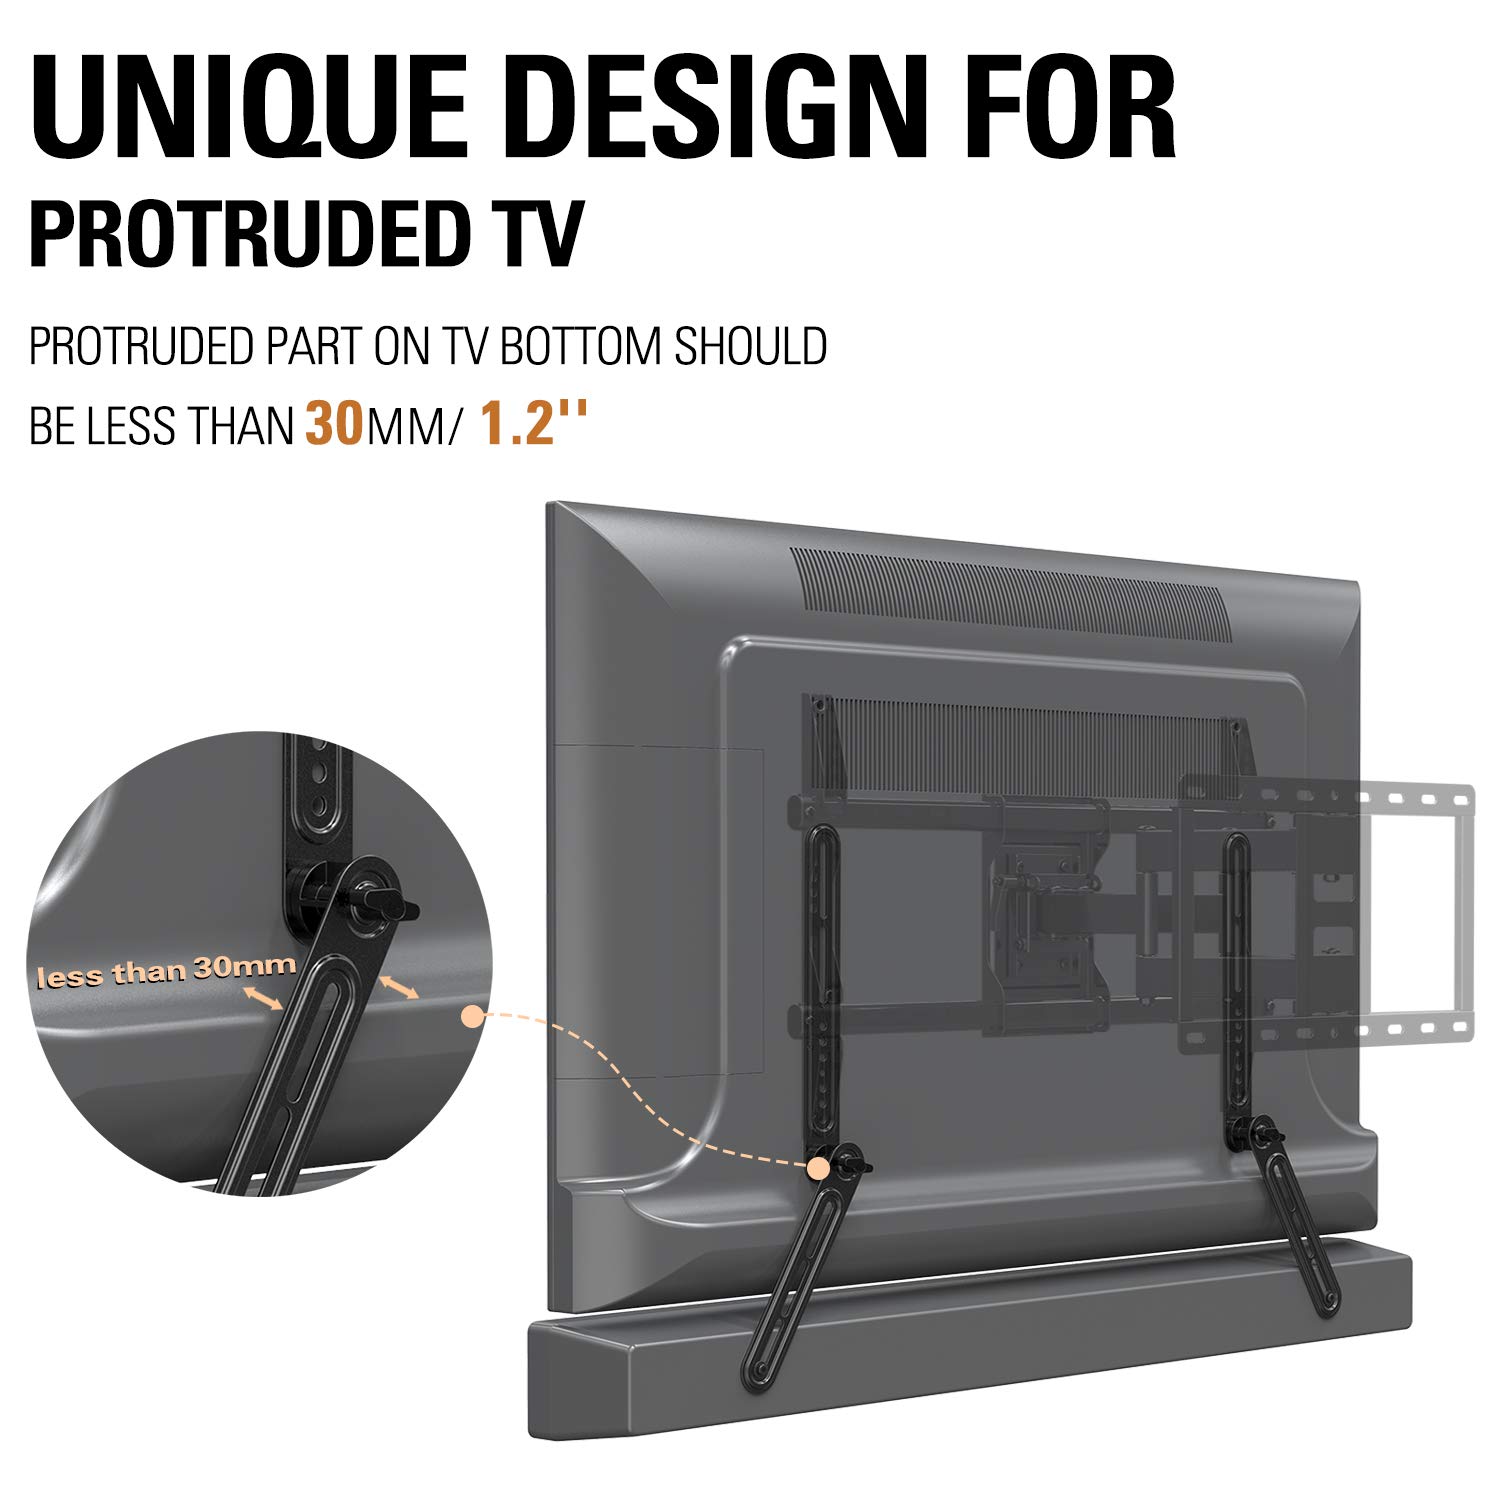 Mounting Dream Soundbar Bracket Sound Bar TV Mount Designed for TVs with Protruded Bottom on Back - Holds Up to 15 lbs - with Adjustable Arm and L-Shaped Bracket for Mounting Above Under TVs MD5421